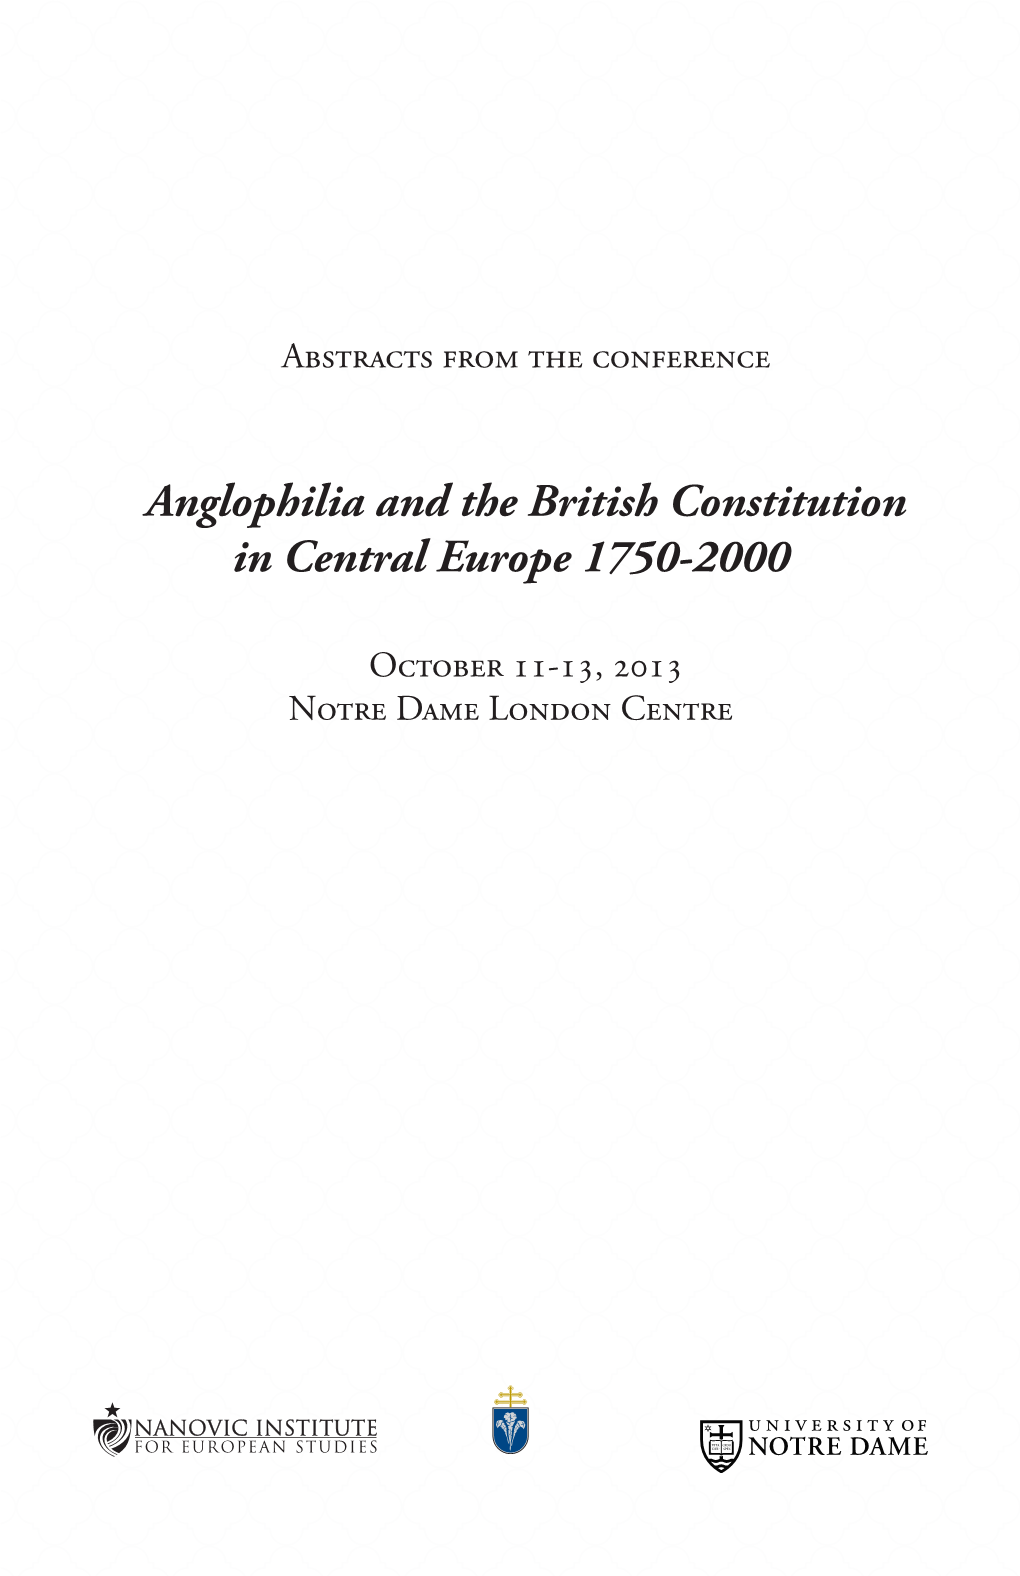 Anglophilia and the British Constitution in Central Europe 1750-2000